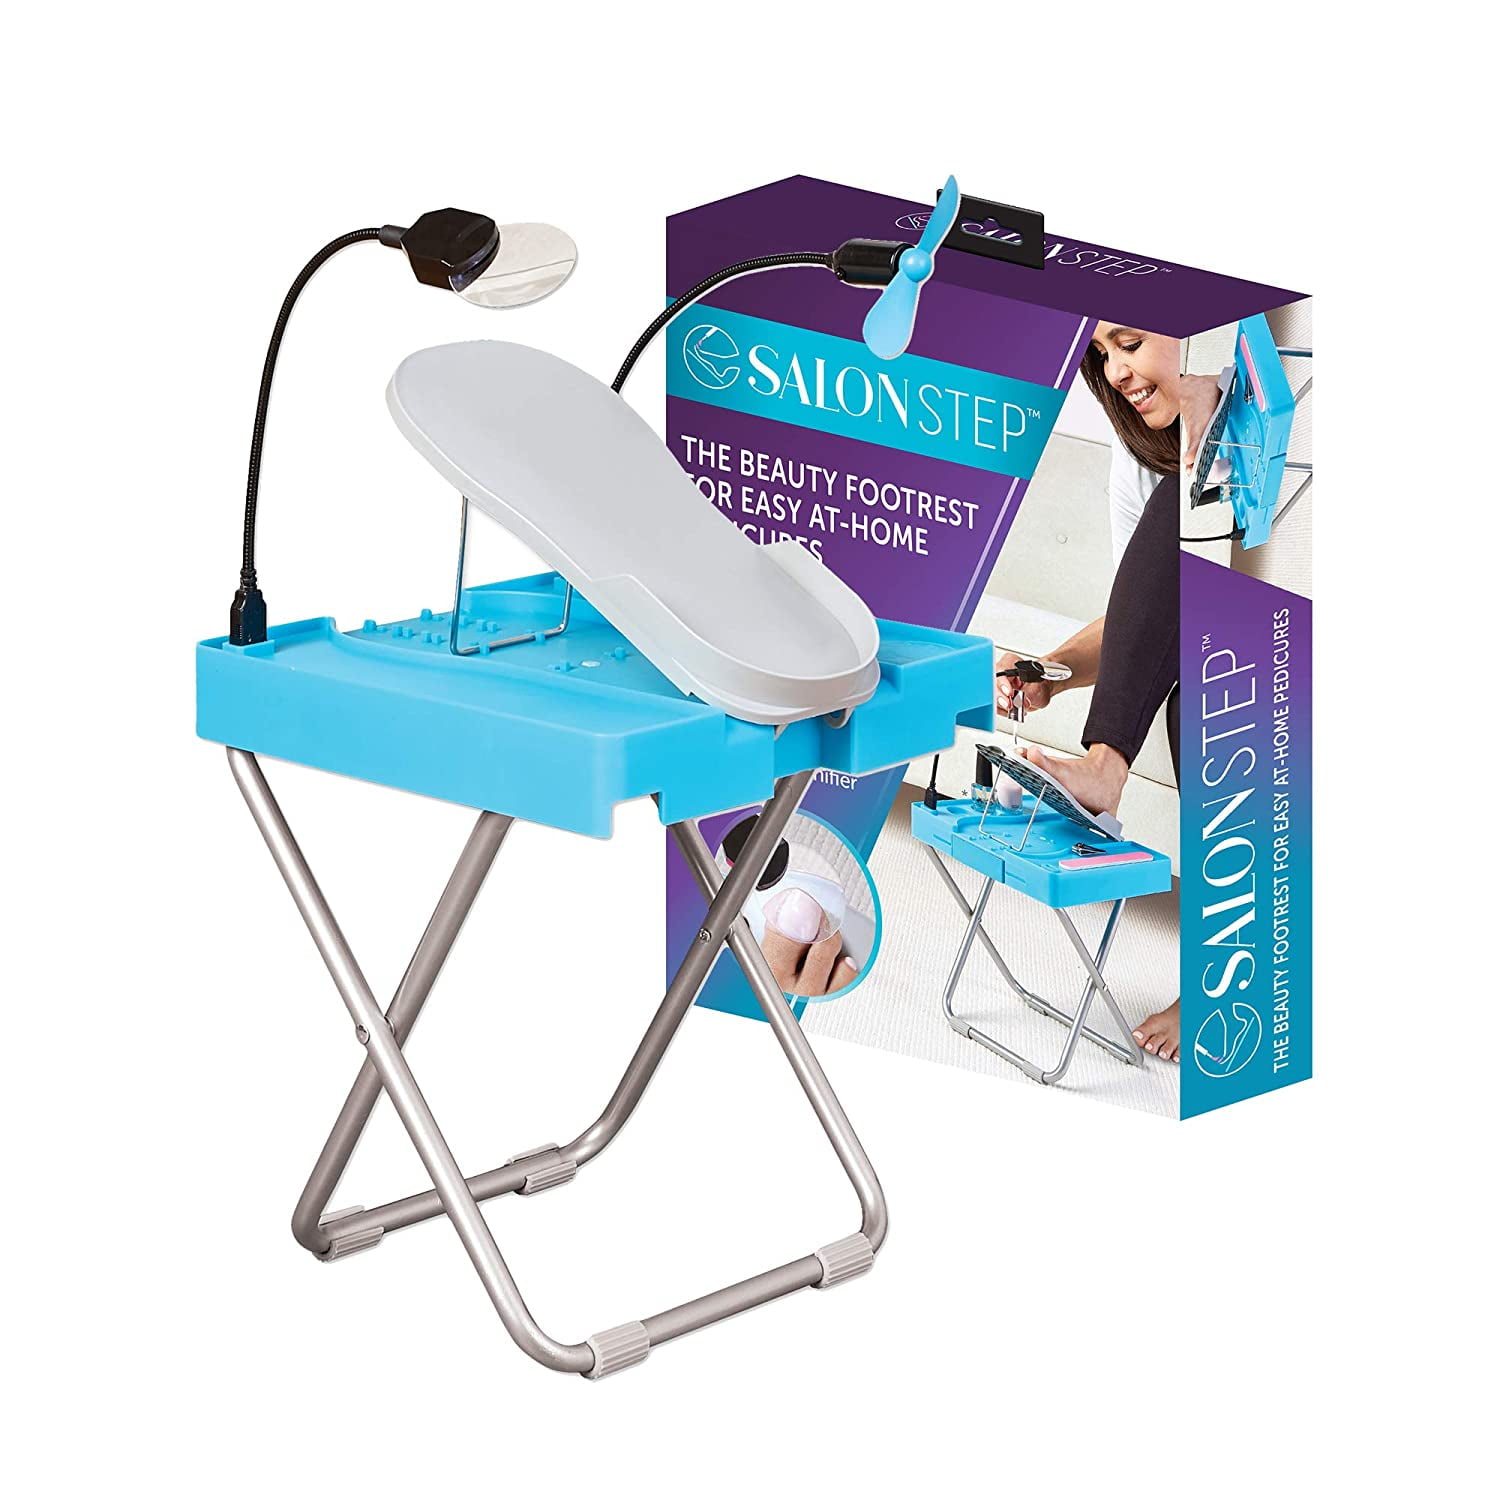 Treat Your Feet Salon Step The Beauty Footrest for Easy At-Home Pedicures Adjustable Foot Rest No More Bending or Stretching with LED Magnifier Drying Fan Non-Slip Sturdy Legs & Built-In Storage 